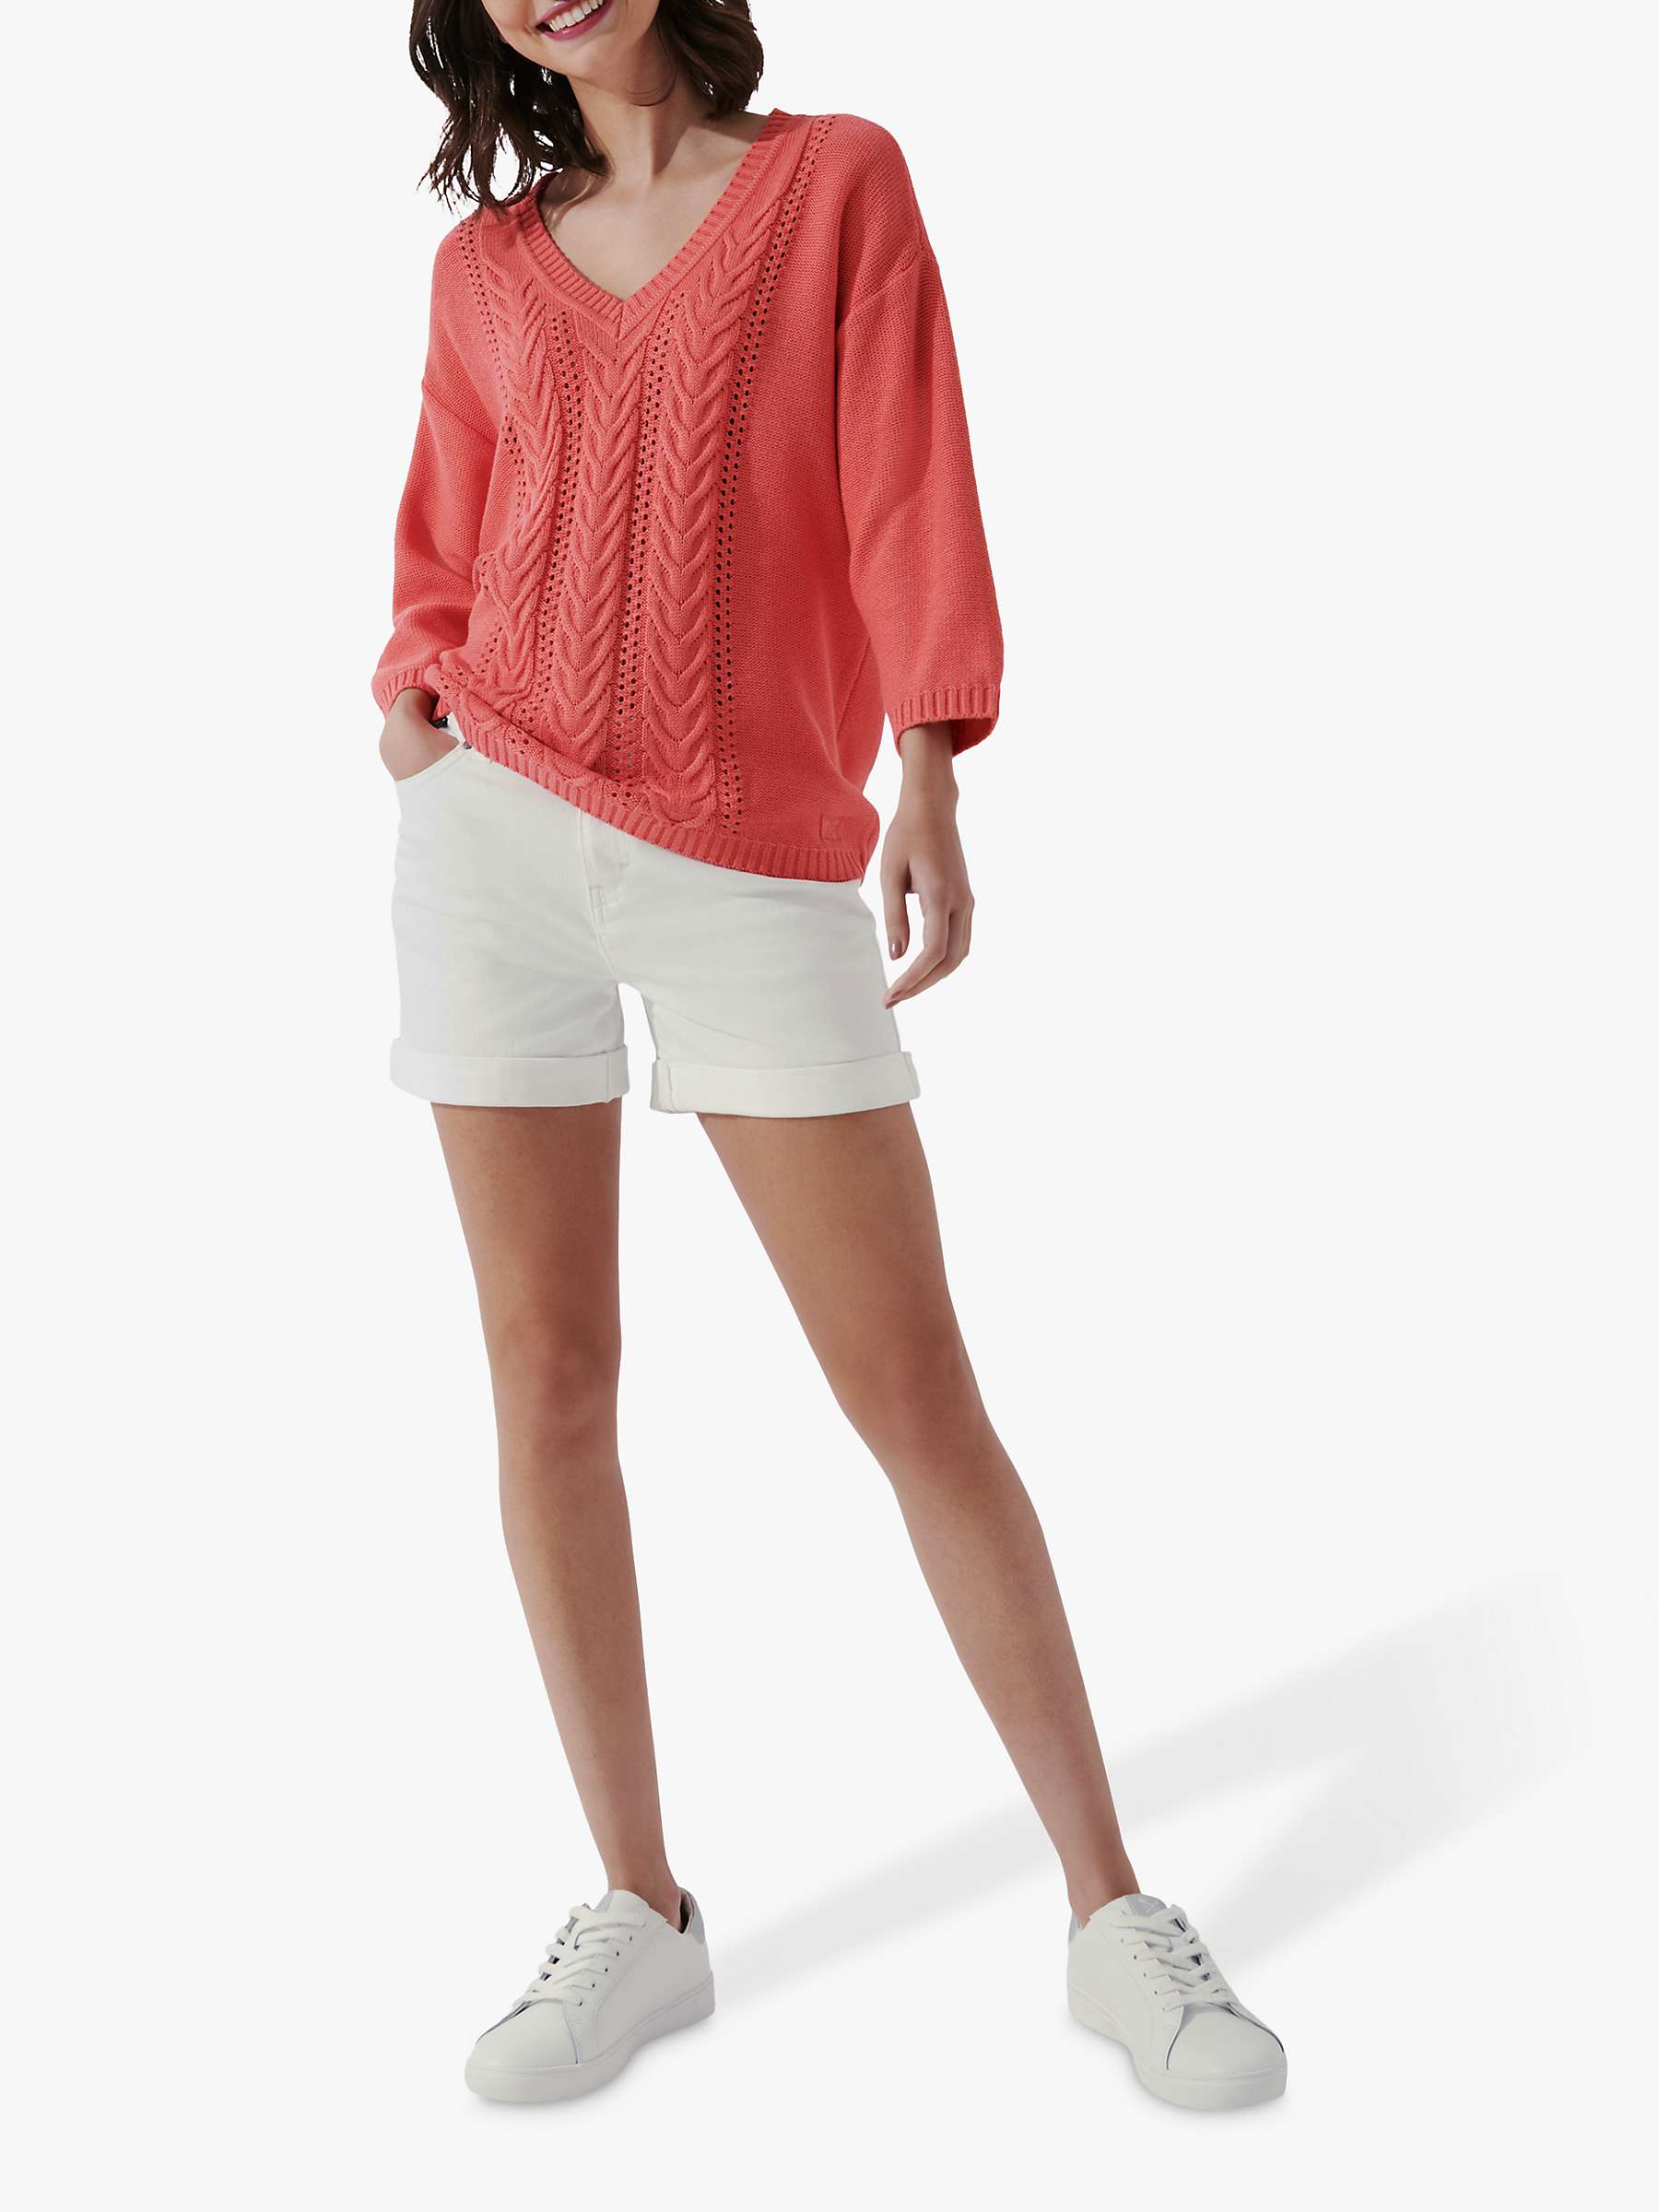 Buy Crew Clothing Falmouth Cable Knit Jumper Online at johnlewis.com